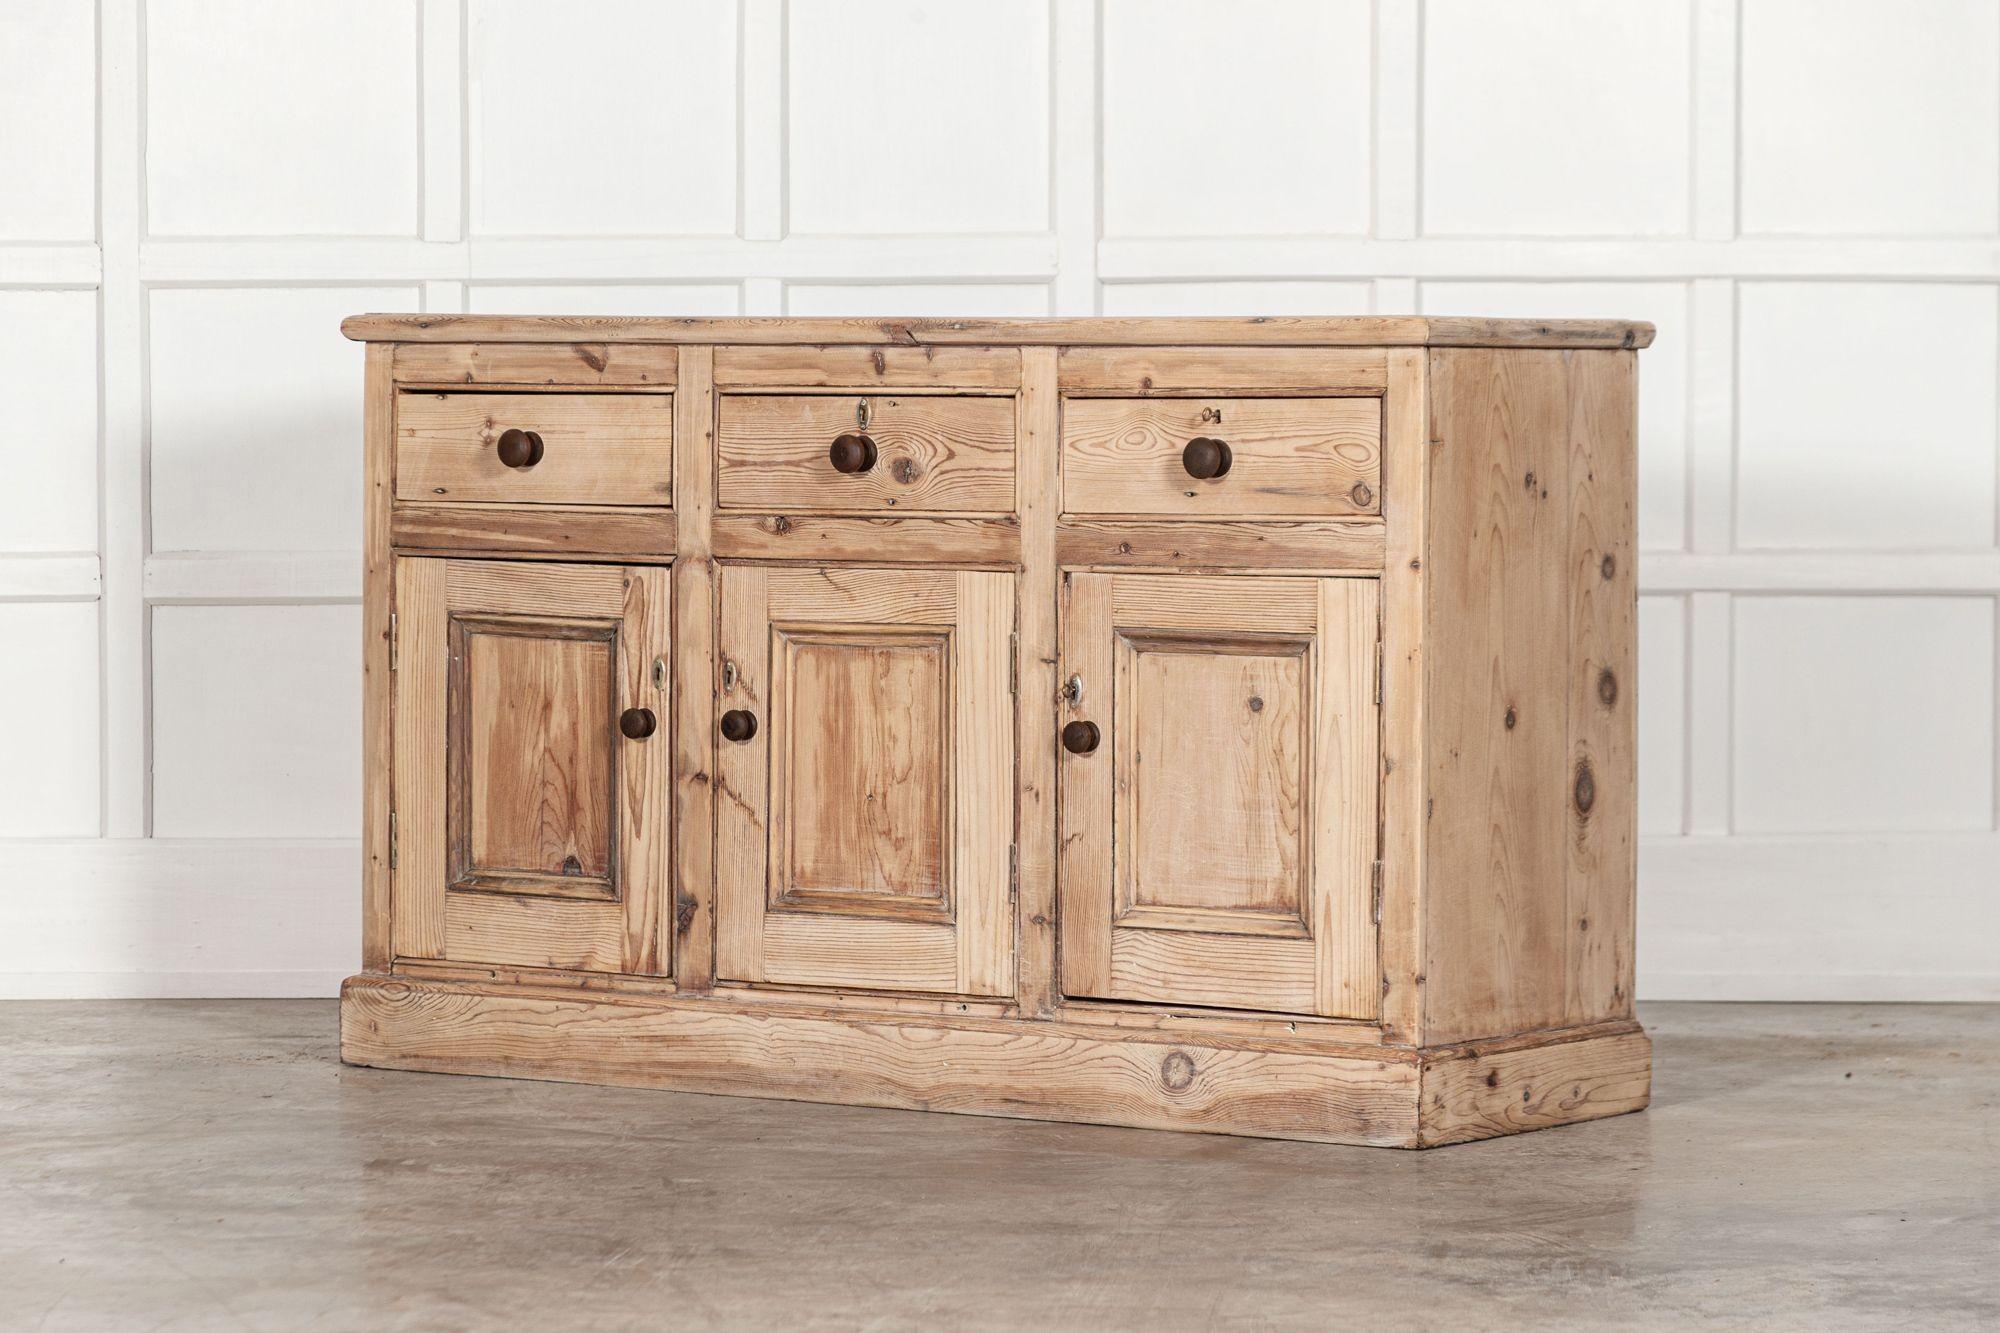 circa 1890
19th century English pine dresser base
We can also customise existing pieces to suit your scheme/requirements. We have our own workshop, restorers and finishers. From adapting to finishing pieces including, stripping, bleaching,